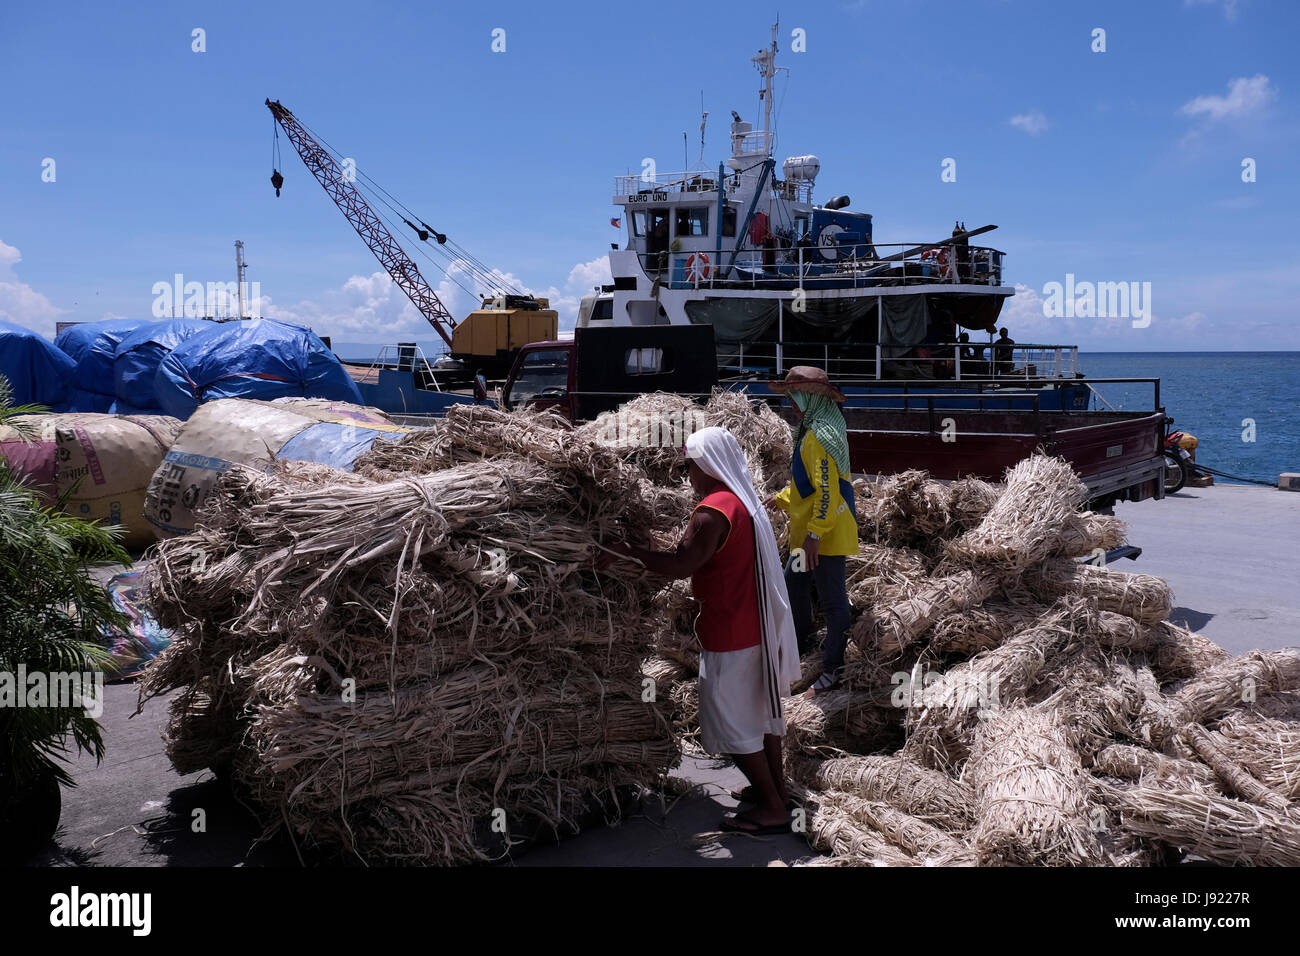 Workers at the port of the city of Siquijor at the island of Siquijor located in the Central Visayas region of the Philippines Stock Photo